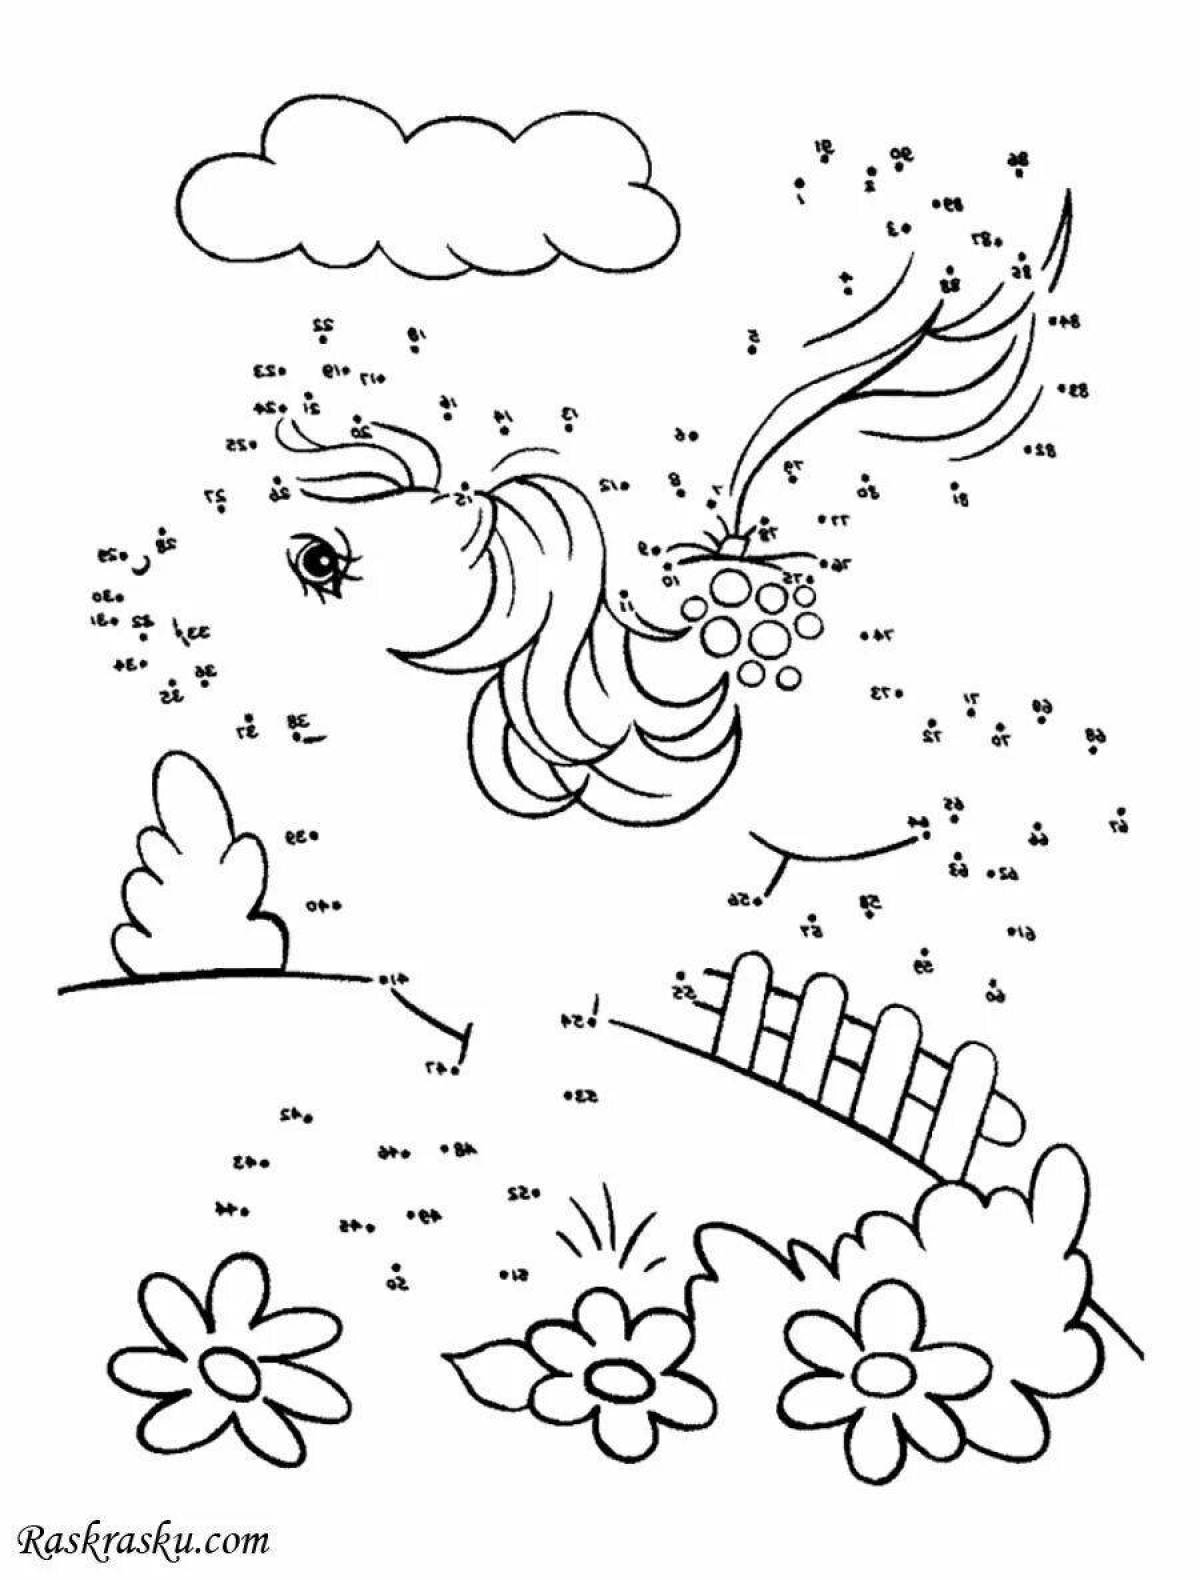 Intricate connect by number coloring page